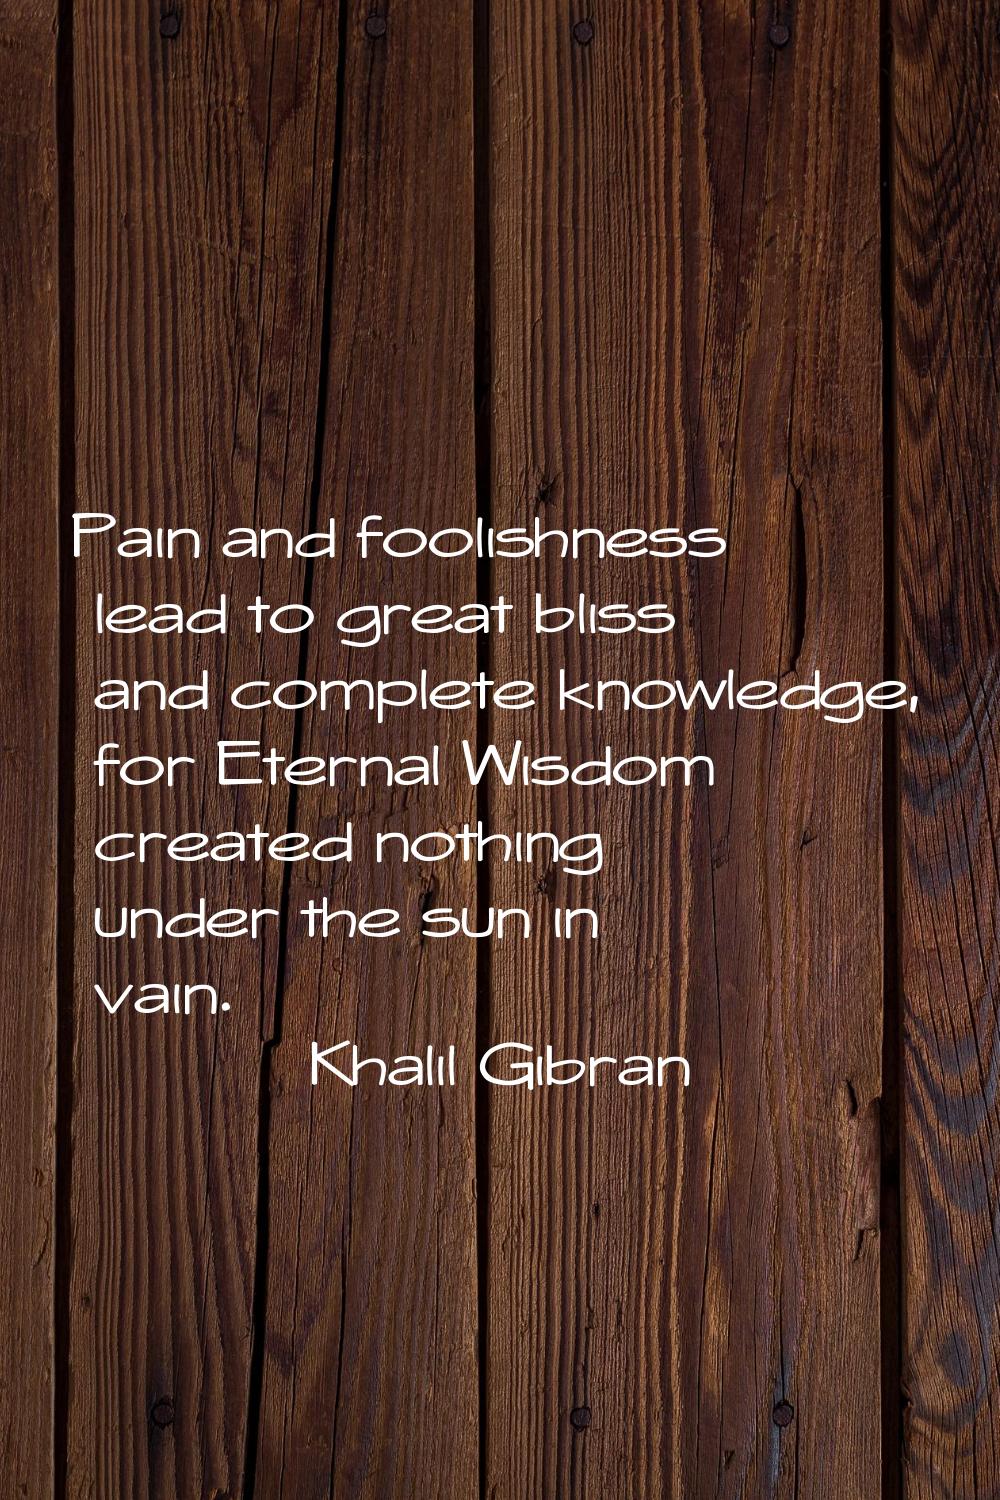 Pain and foolishness lead to great bliss and complete knowledge, for Eternal Wisdom created nothing